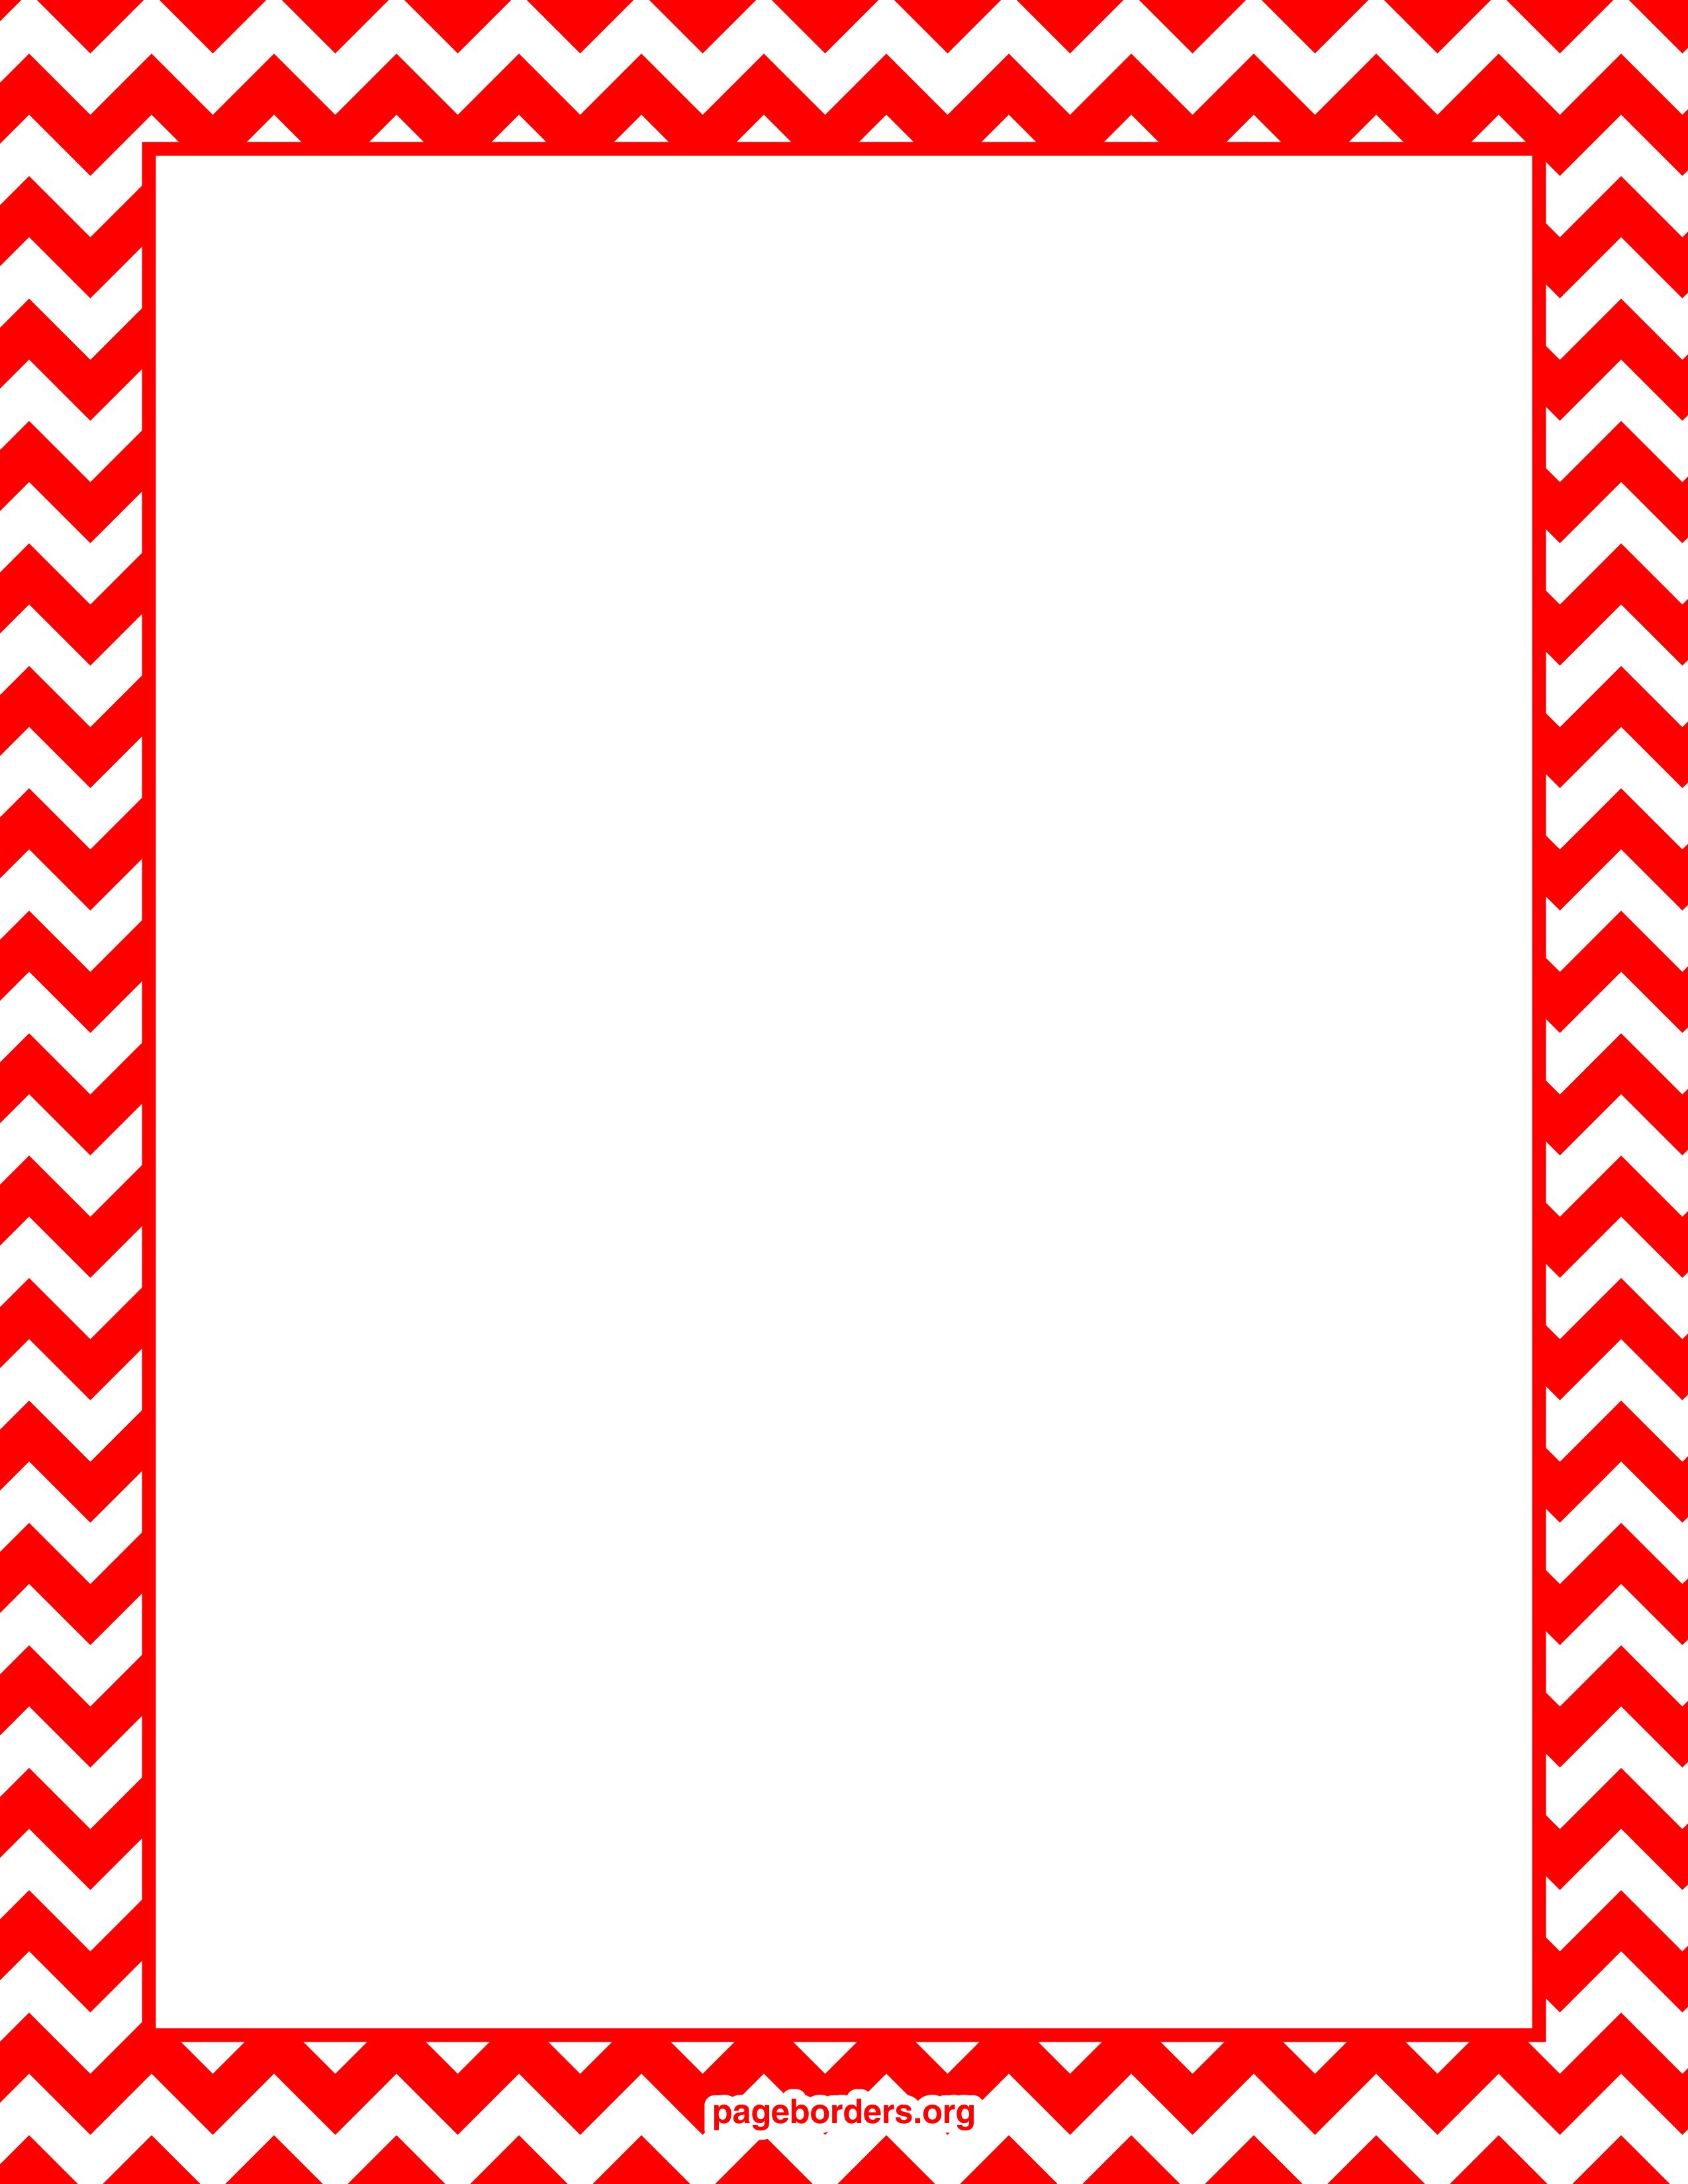 red frame clipart - photo #13